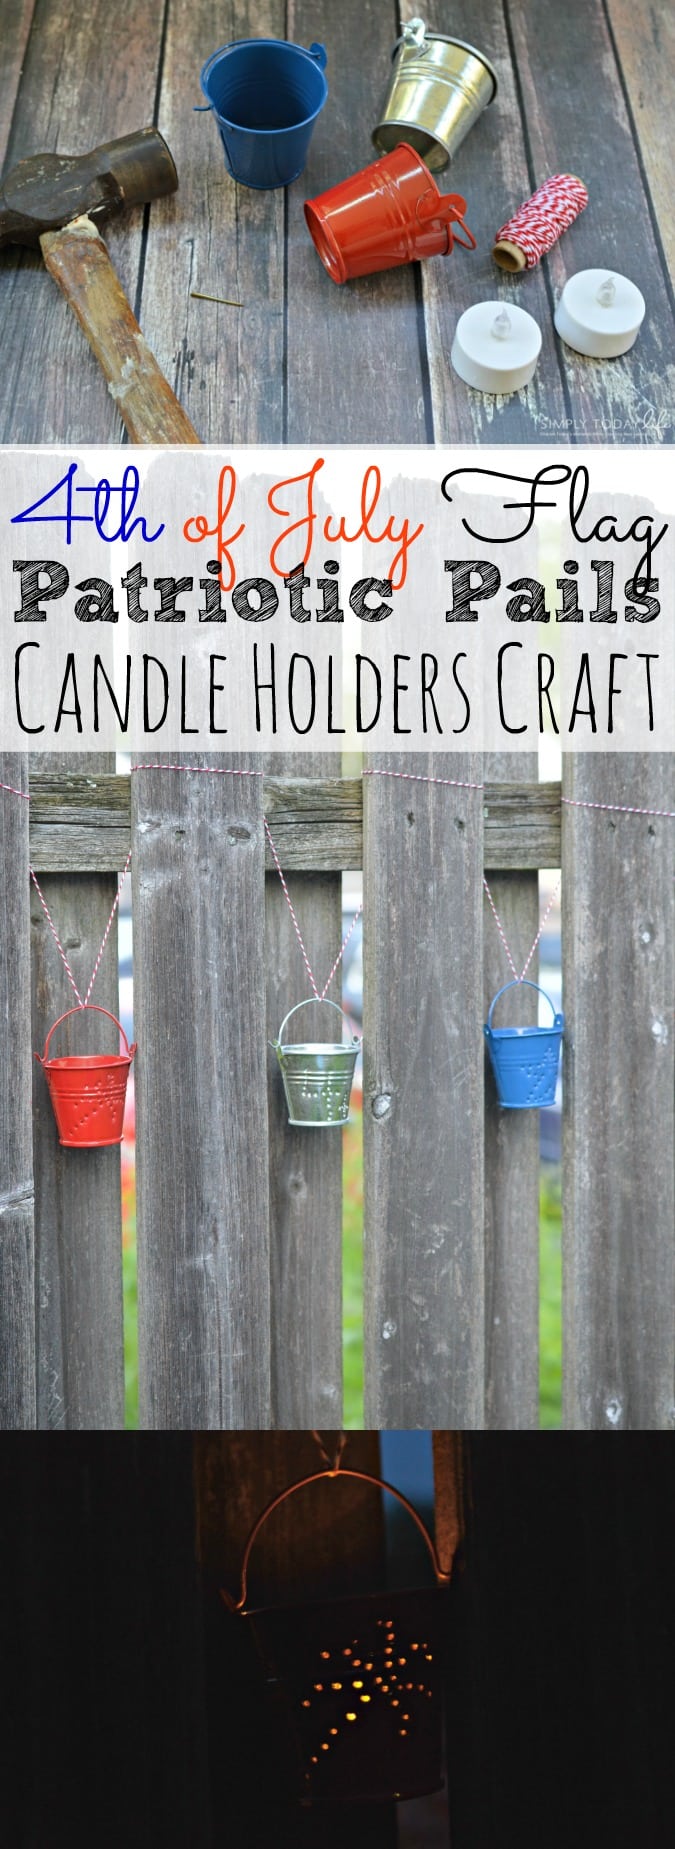 4th of July Patriotic Pails Candle Holders Craft - simplytodaylife.com